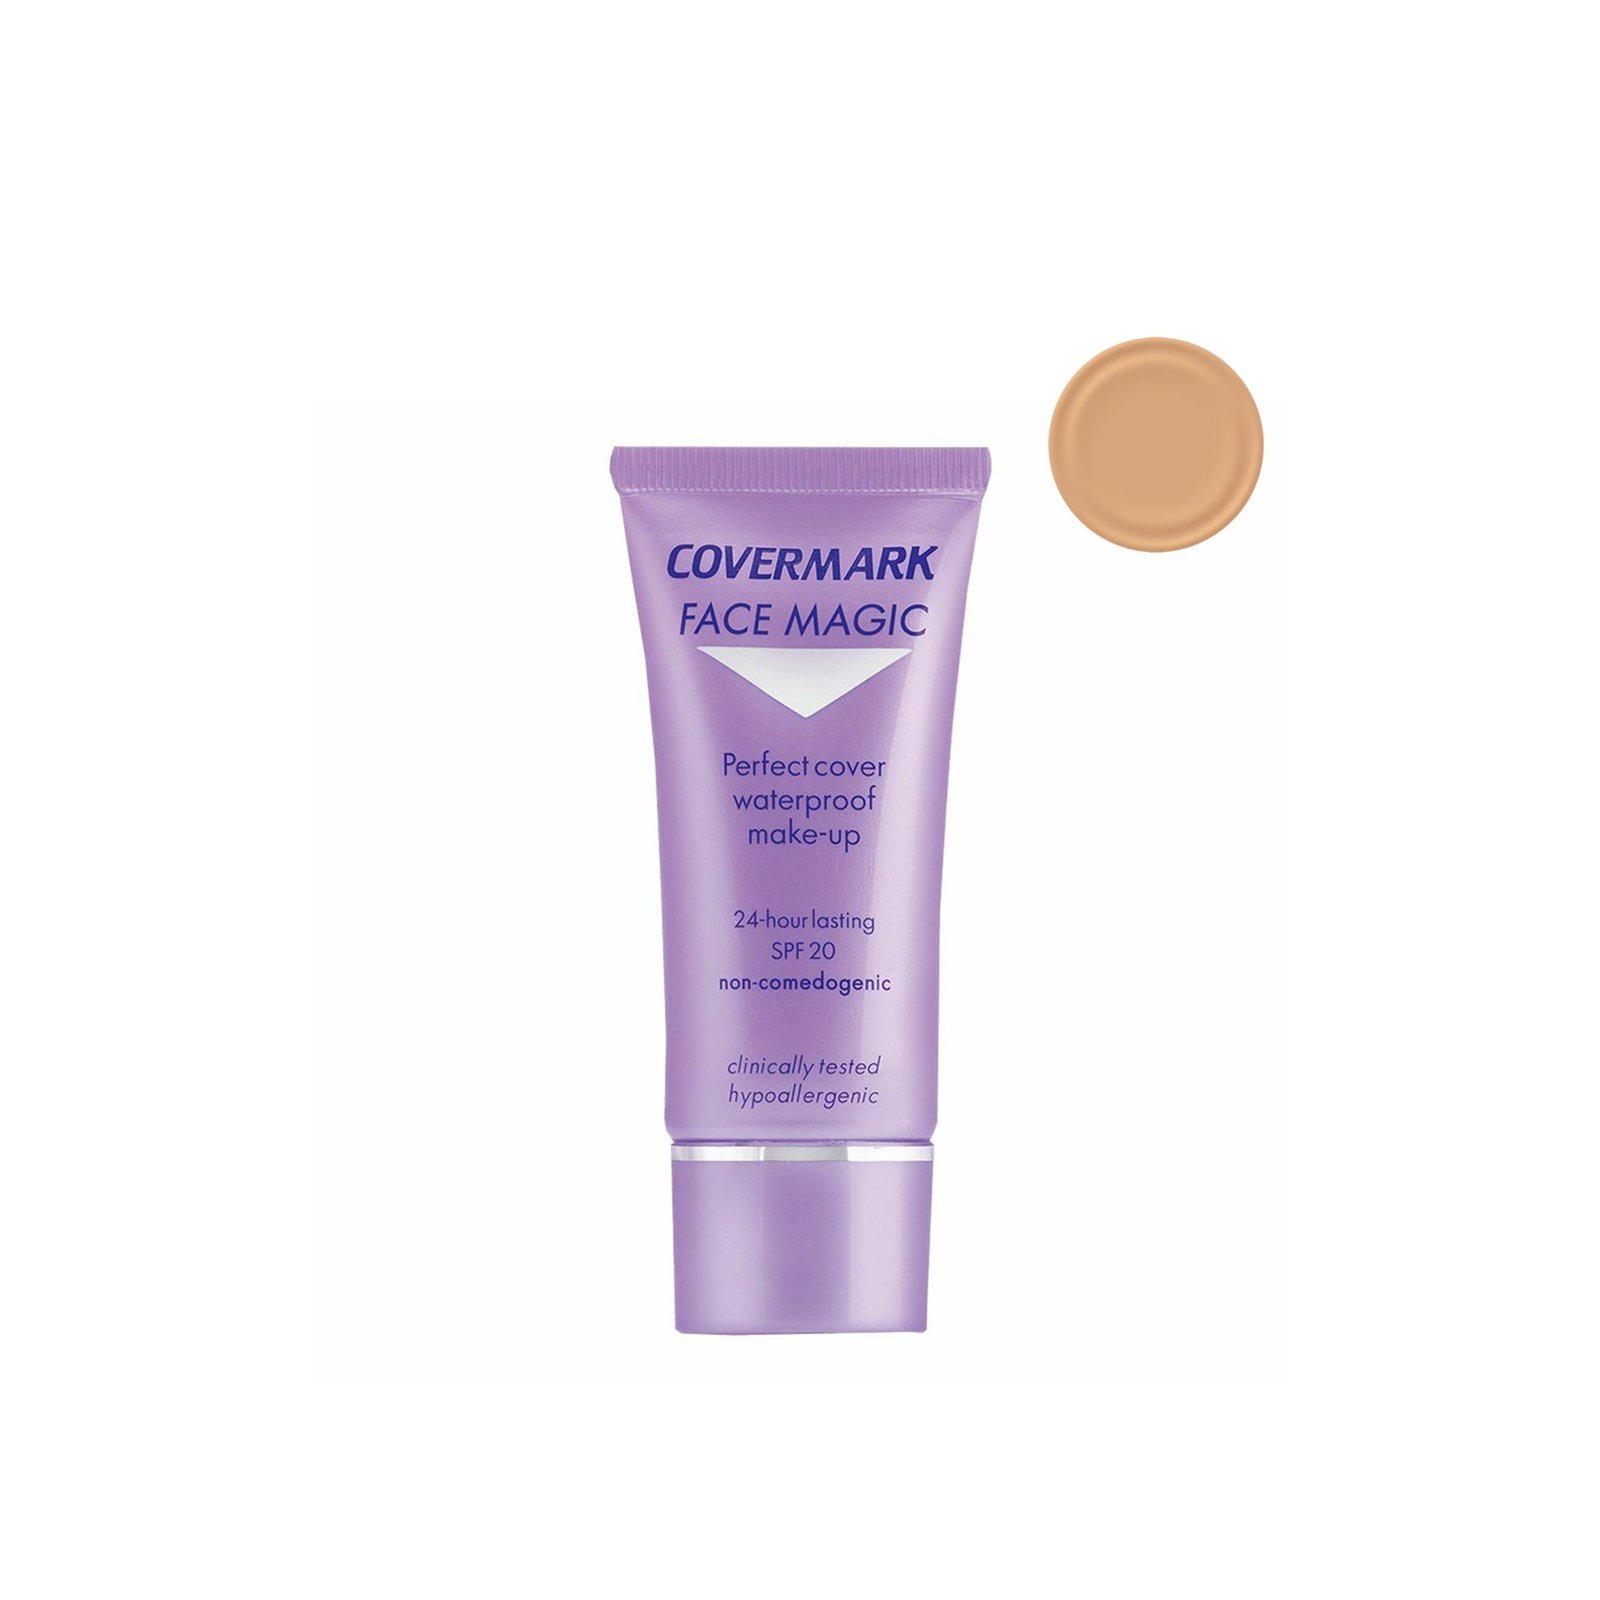 Covermark Face Magic Perfect Cover Waterproof Make-Up SPF20 6A 30ml